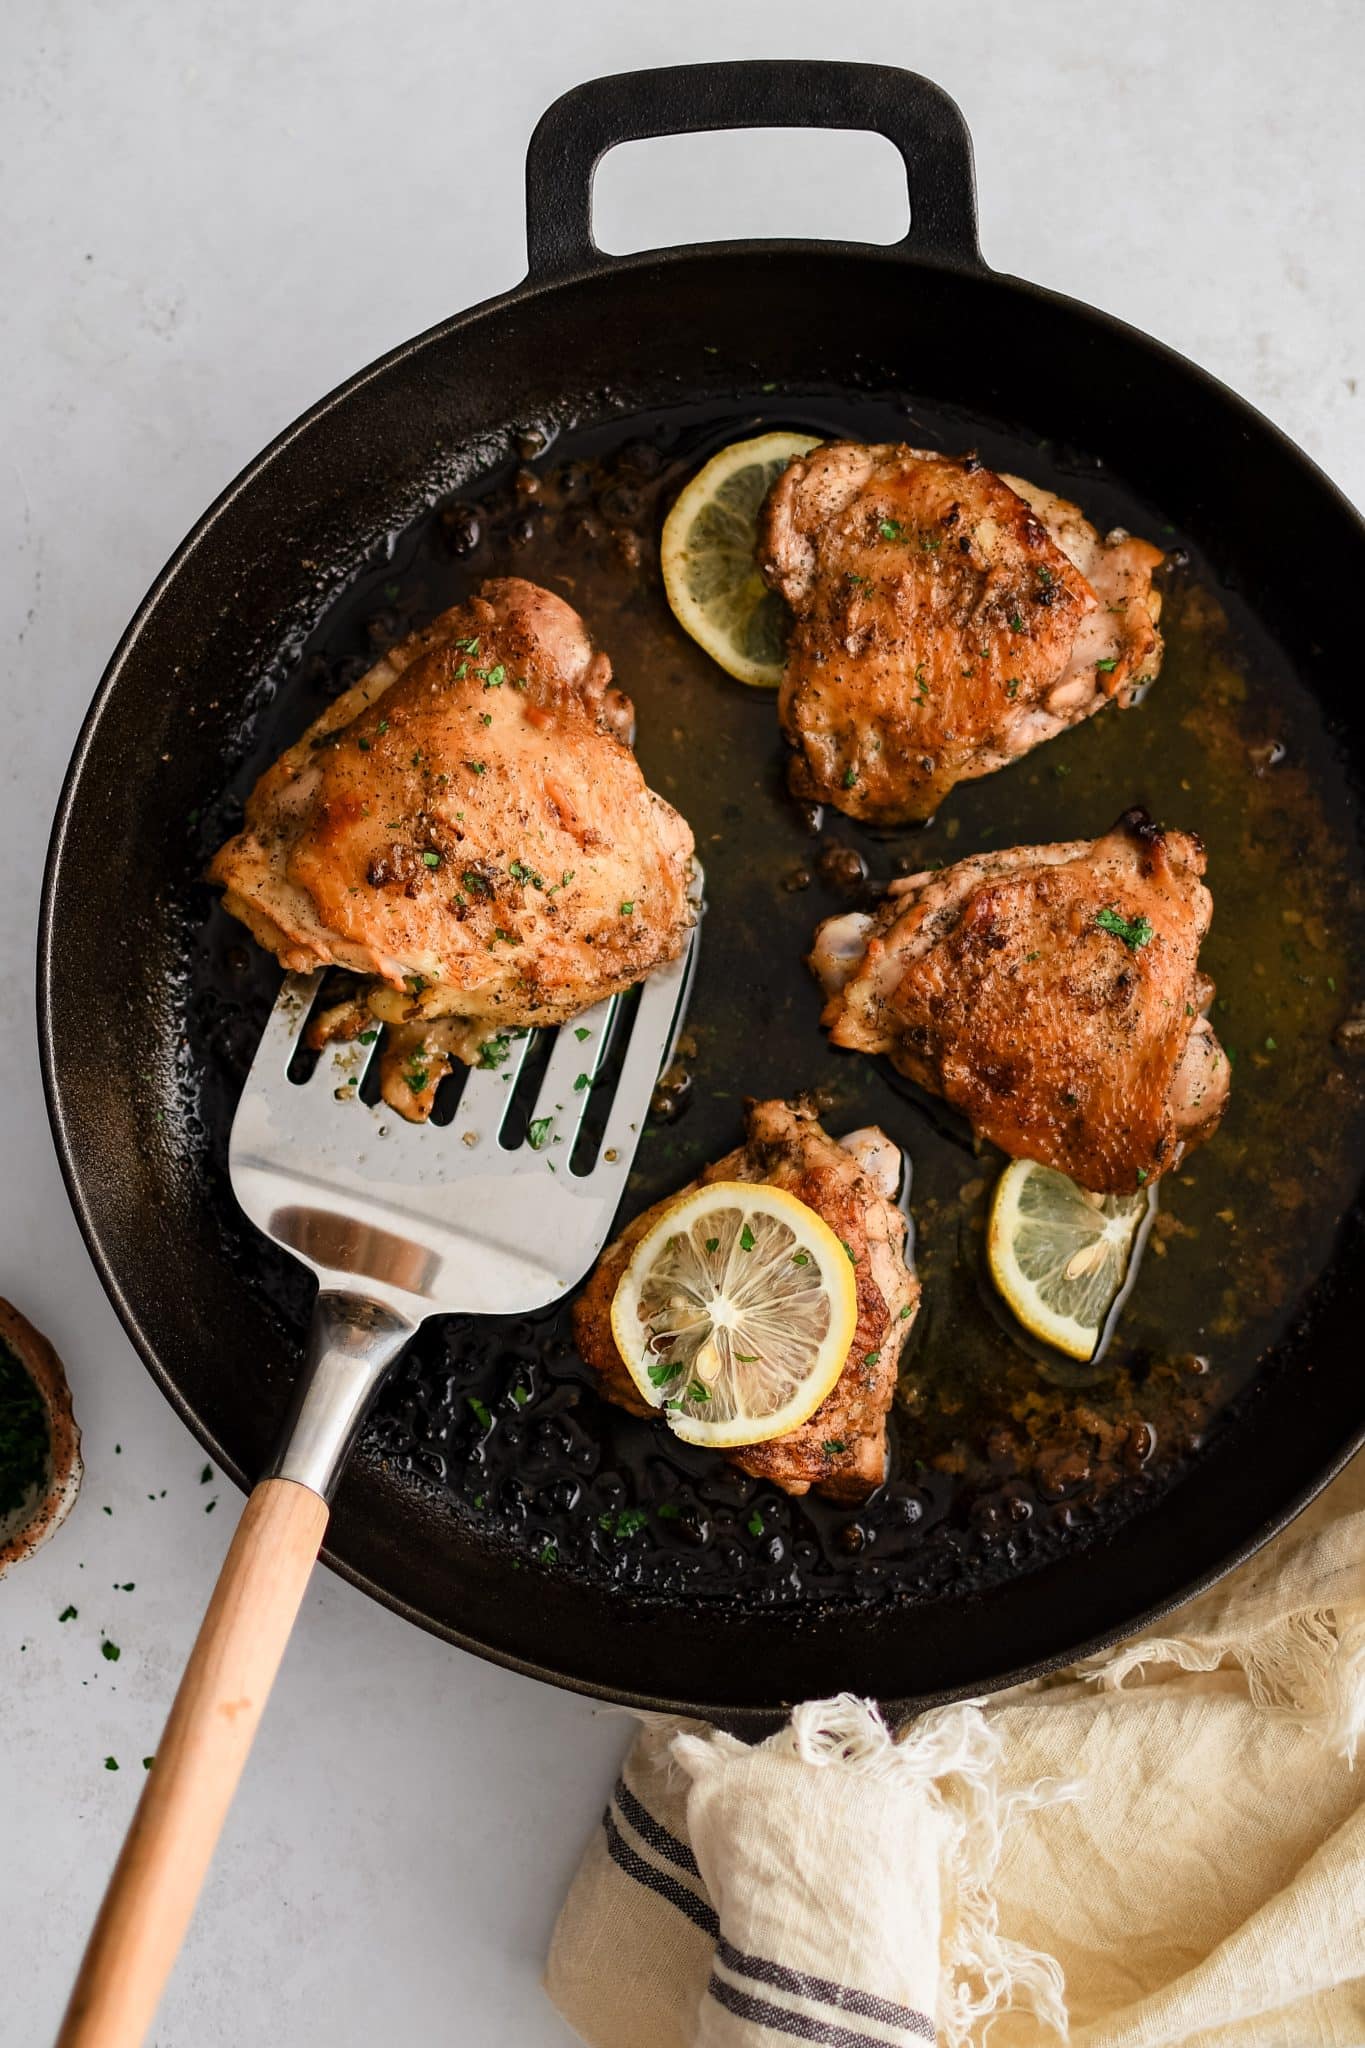 Four fully cooked Greek lemon chicken thighs with golden crispy skin and juicy meat resting in a large cast iron skillet with fresh sliced lemons.